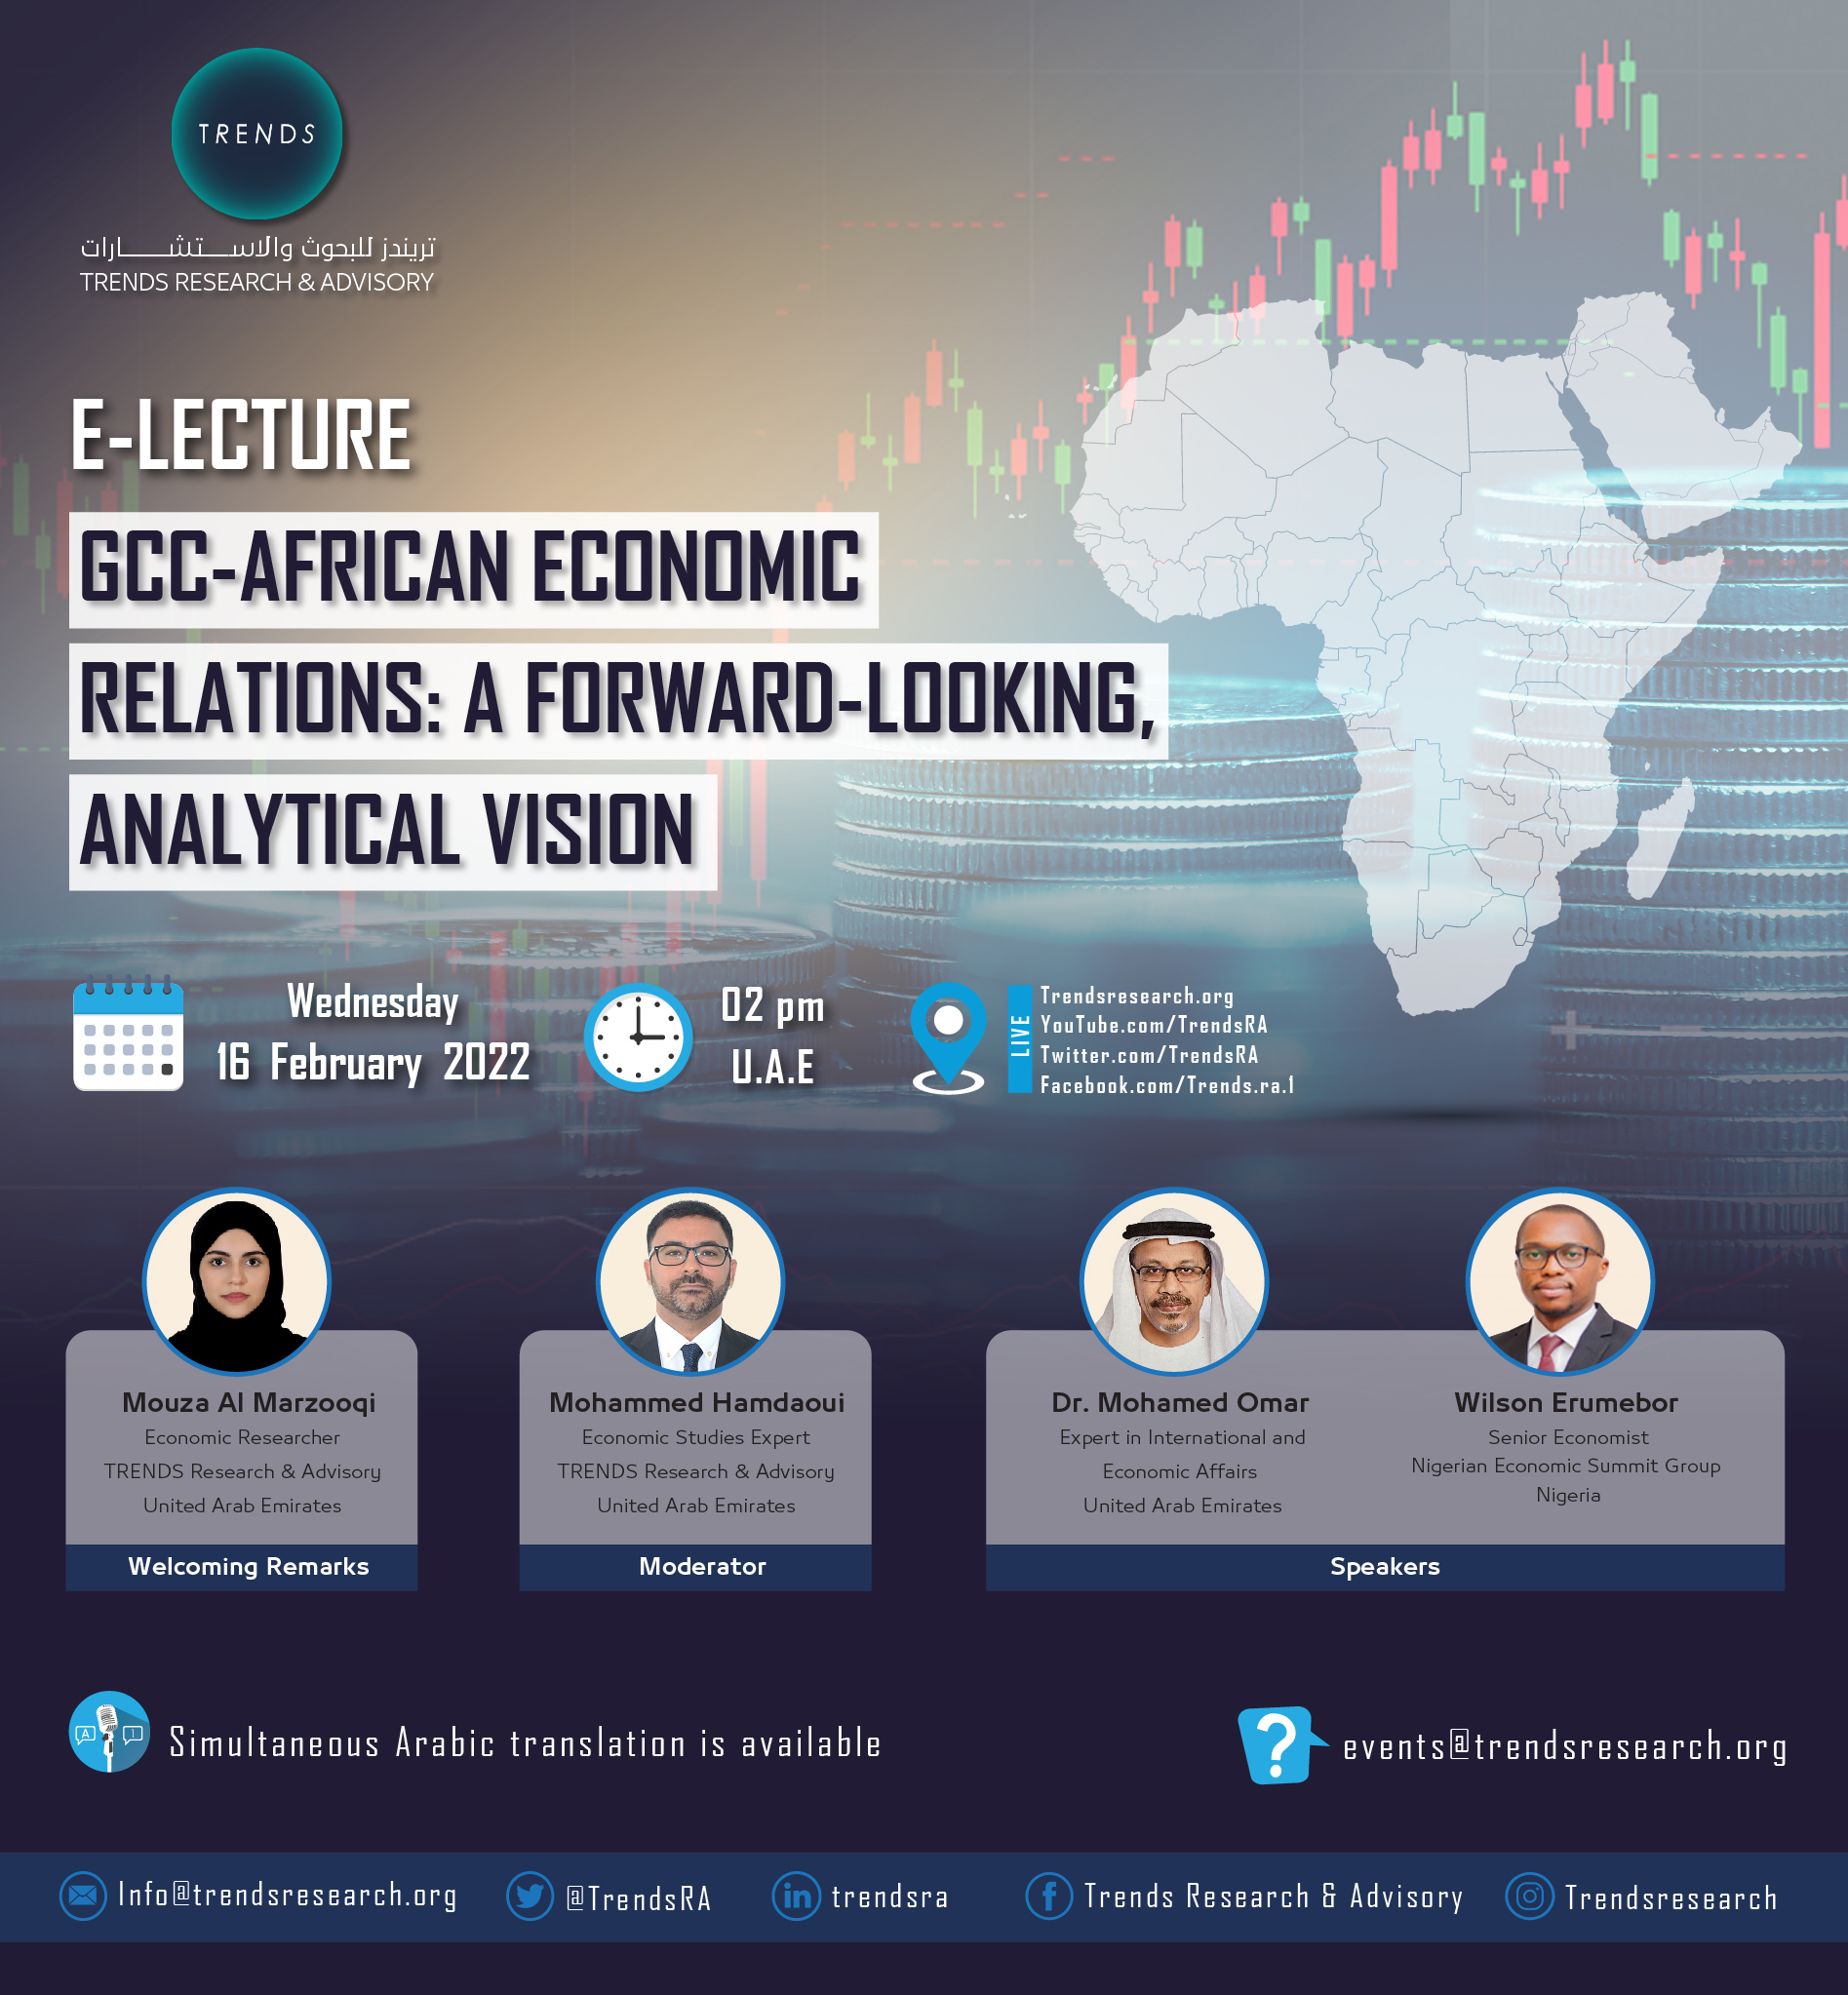 GCC-African Economic Relations: A Forward-Looking, Analytical Vision